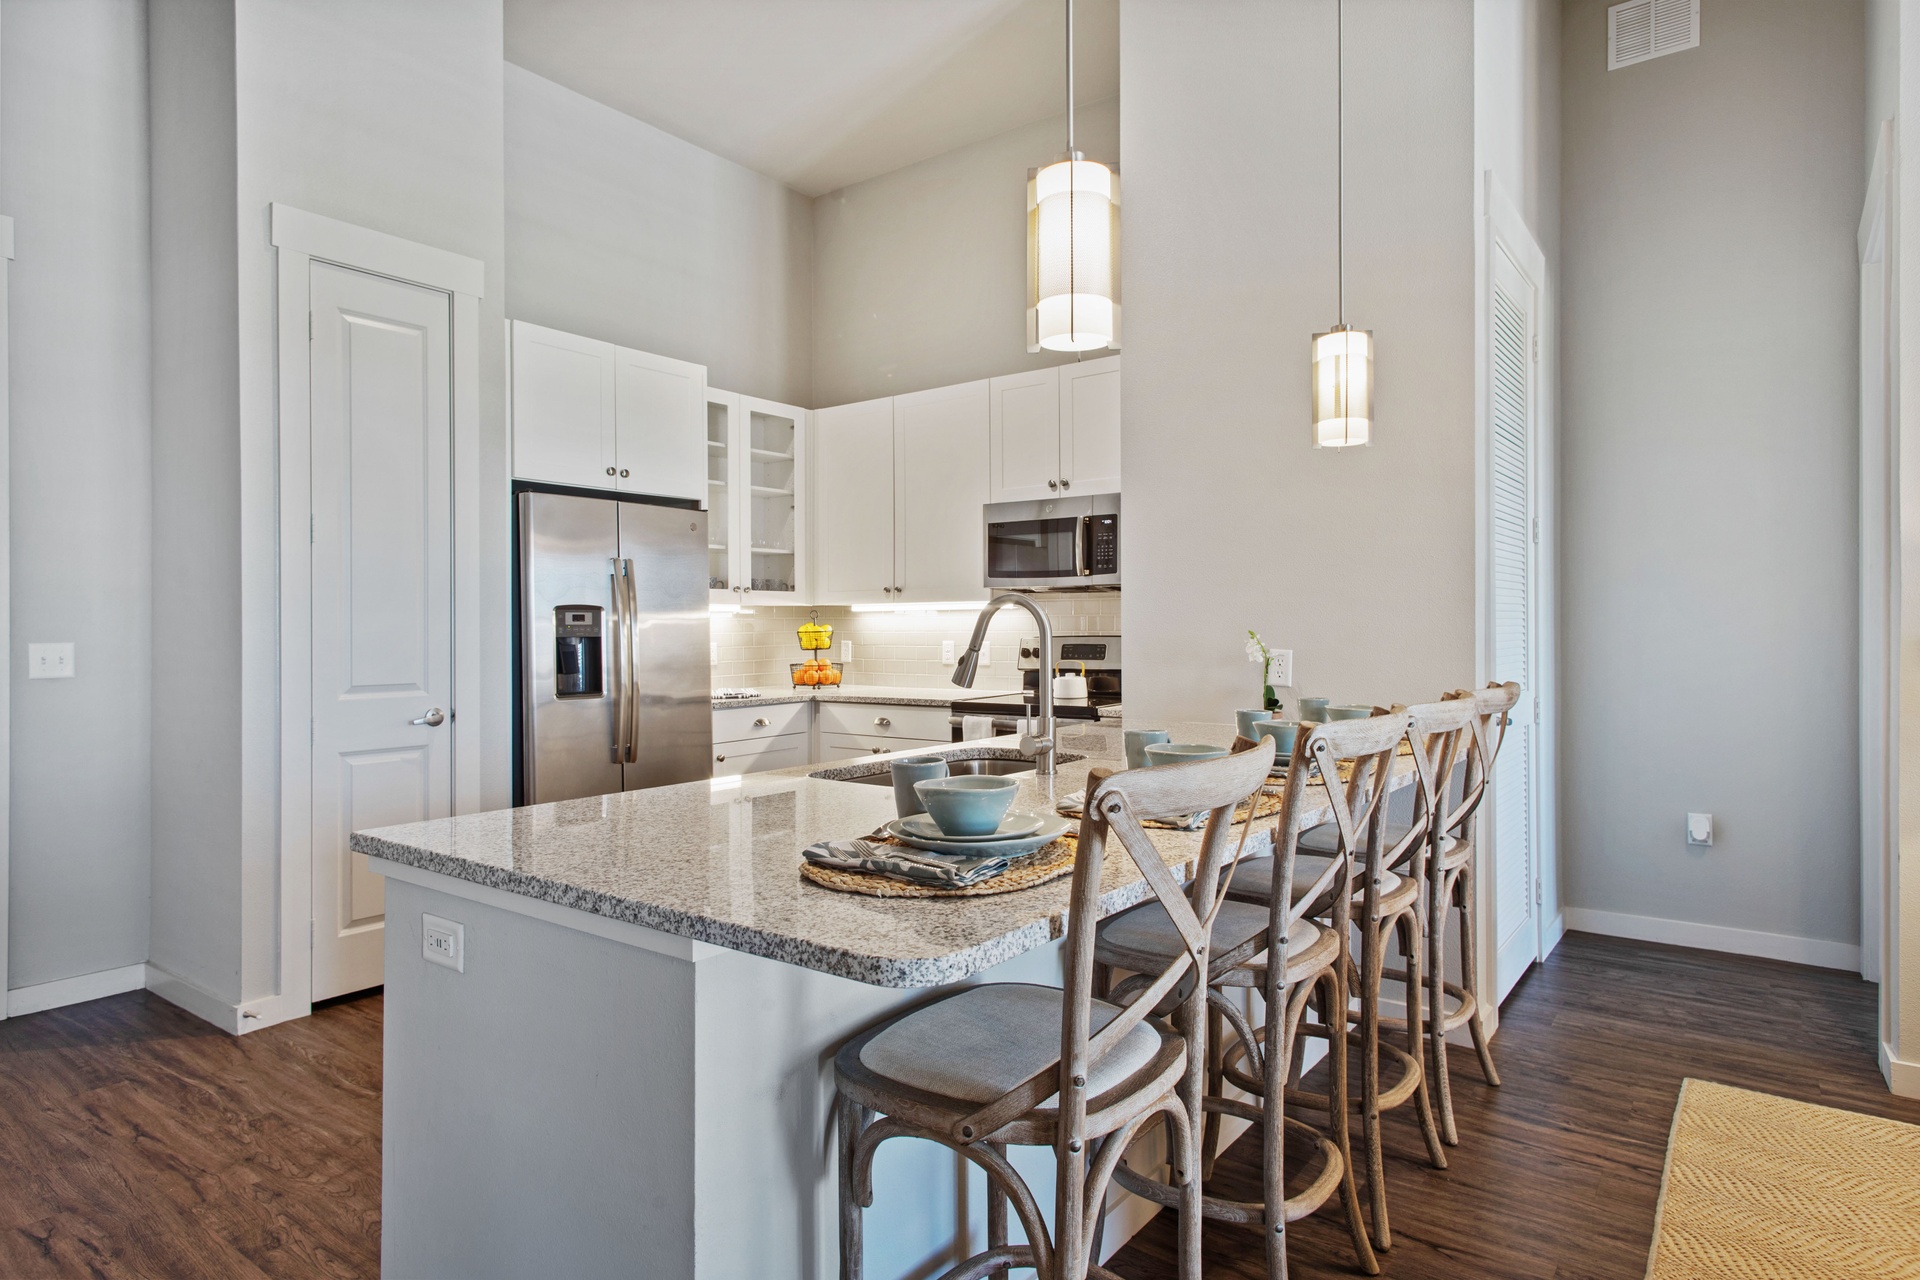 fourteen-foot ceilings interior unit overlooking kitchen with white cabinetry and stainless steel appliances